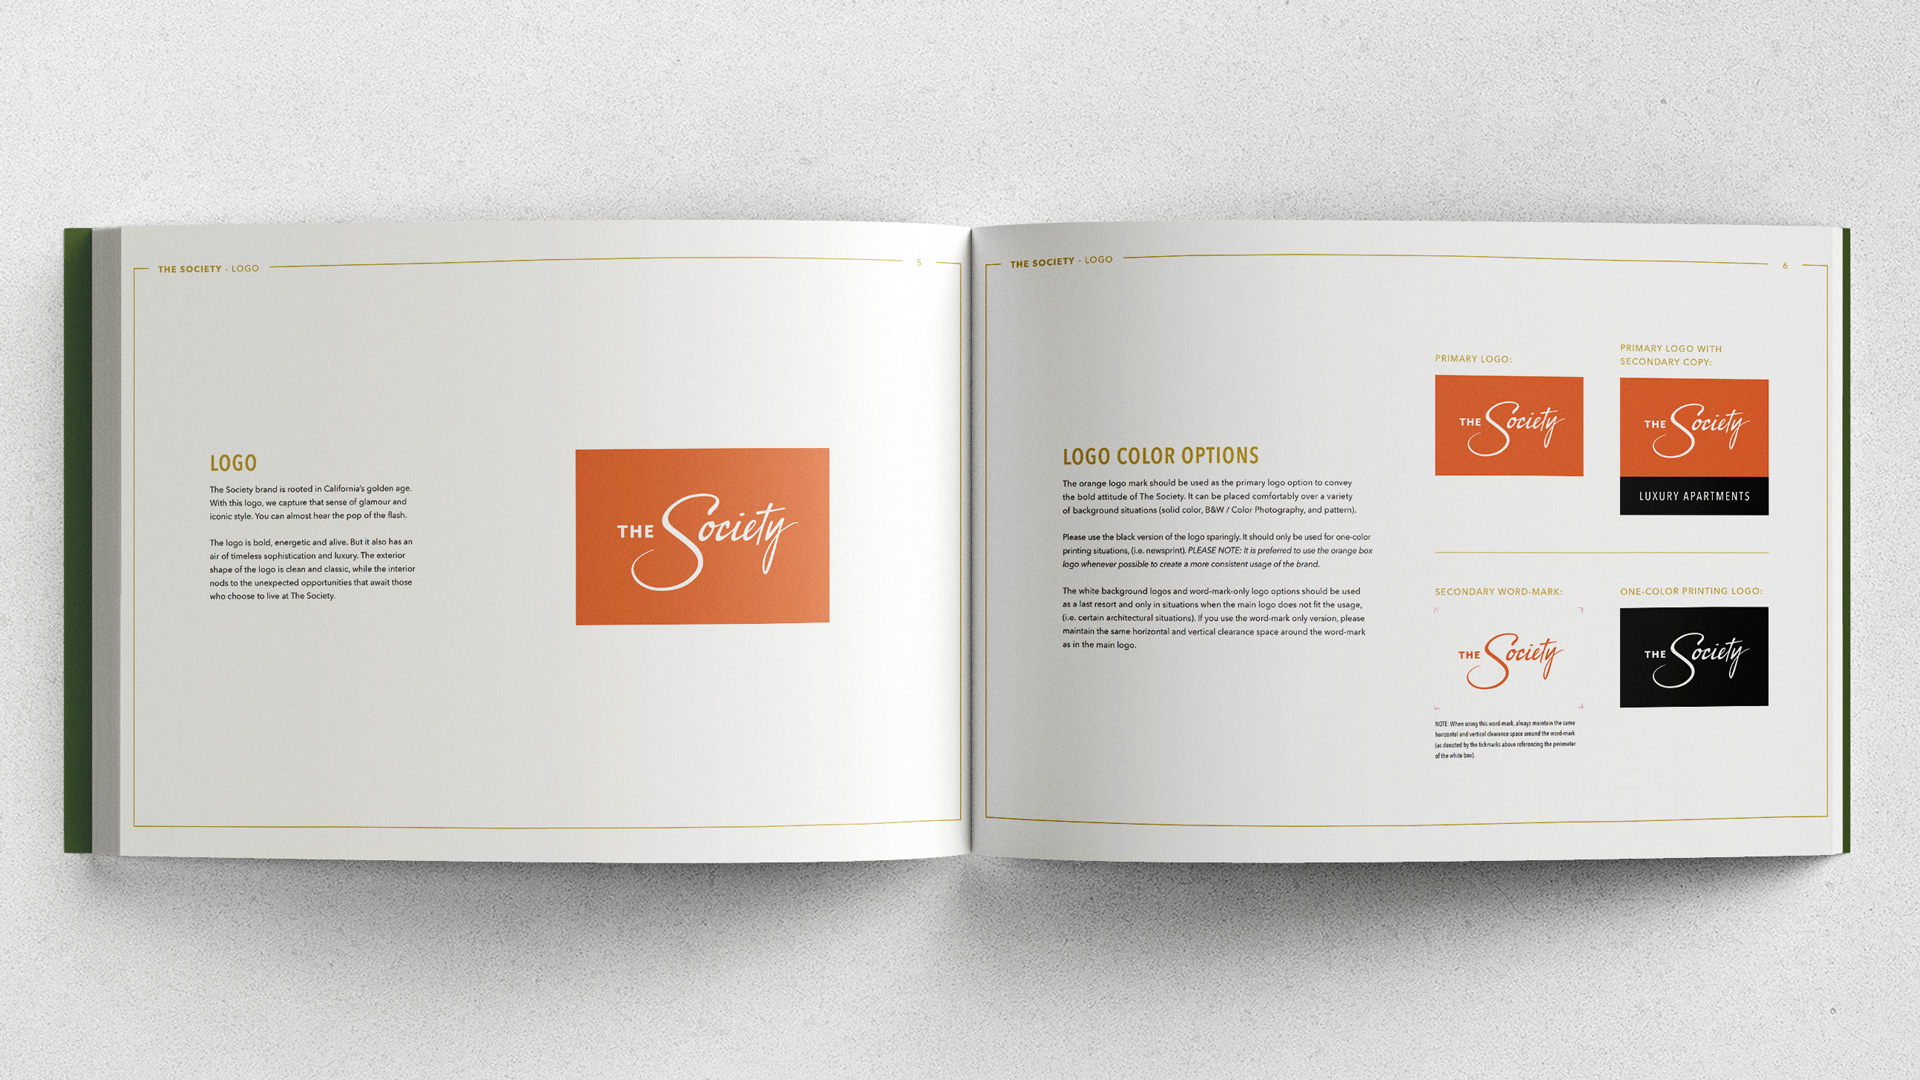 The Society apartments branding brand book showing logo created by Incubate Design for Holland Residential